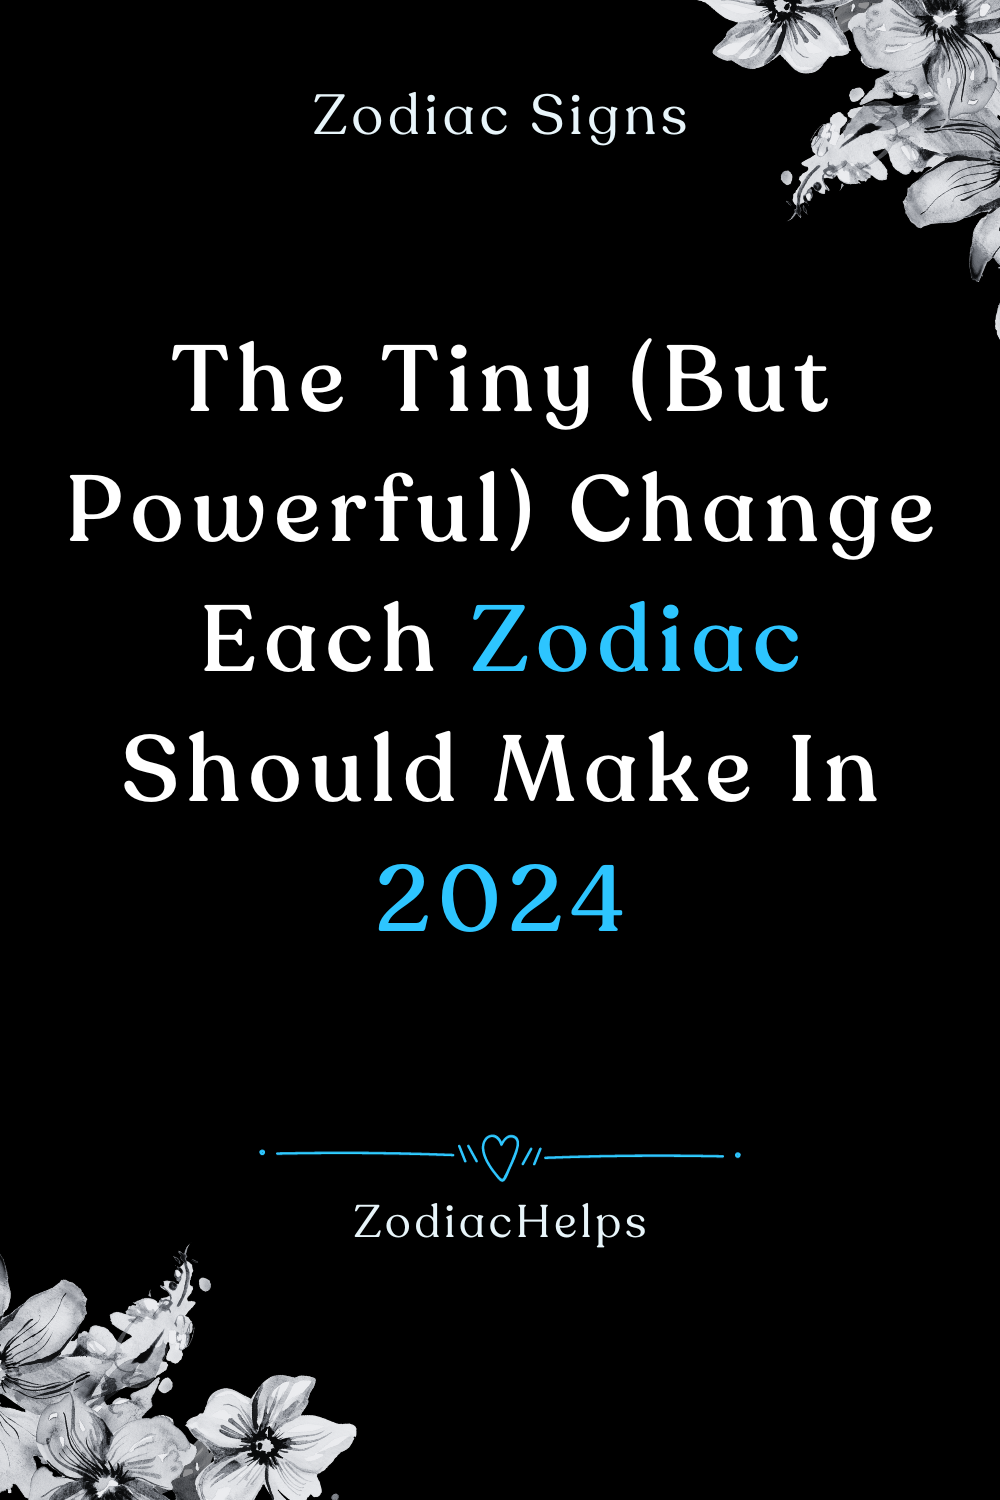 The Tiny (But Powerful) Change Each Zodiac Should Make In 2024